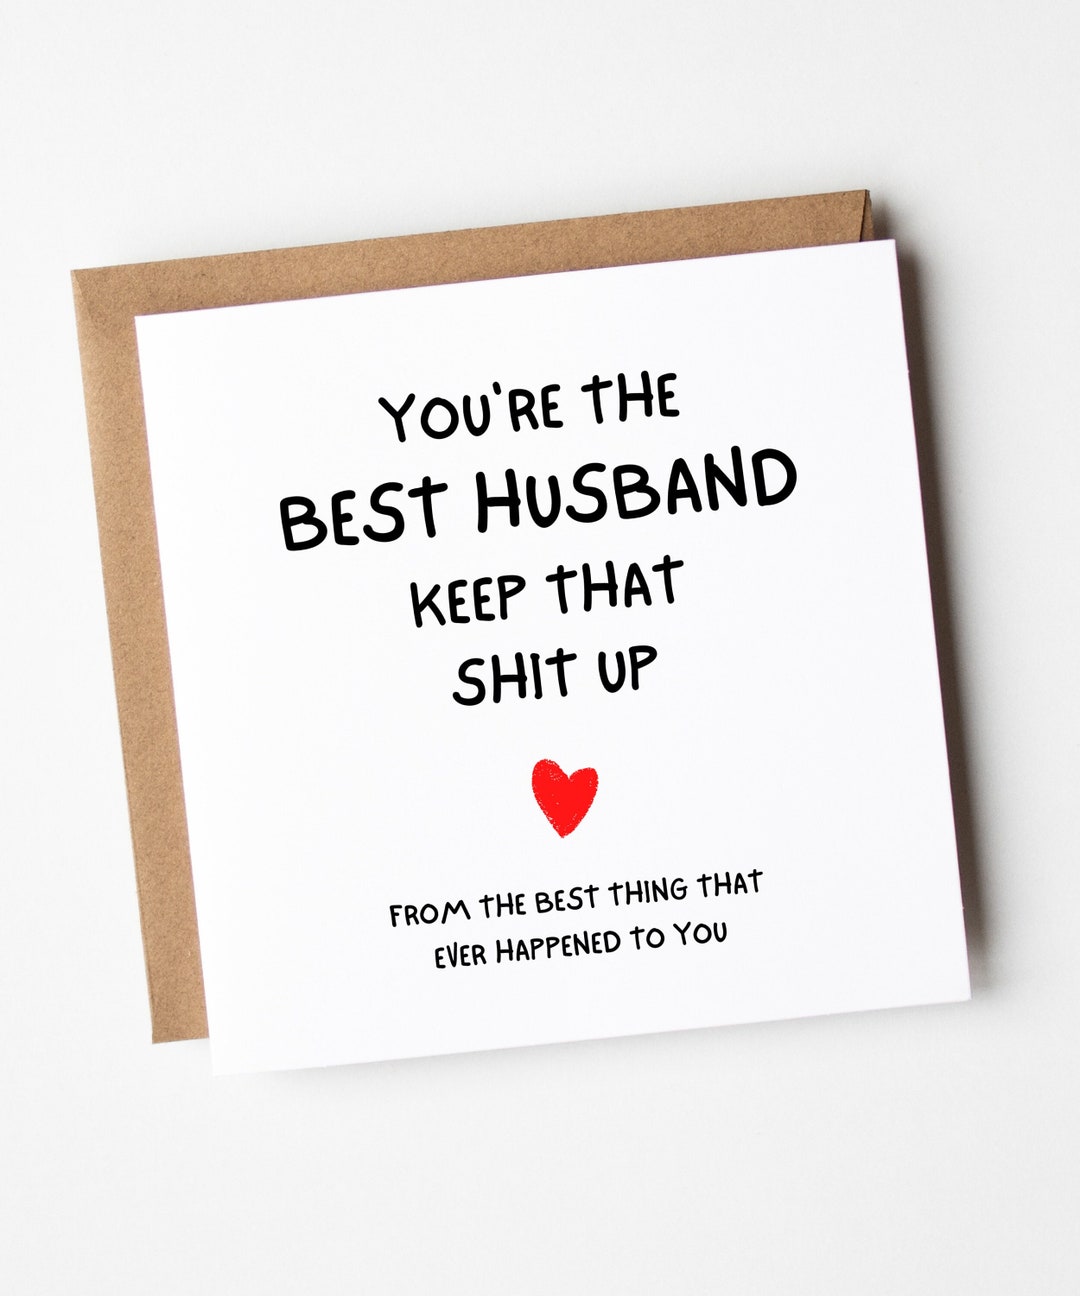 husband-birthday-card-from-wife-you-re-the-best-husband-birthday-card